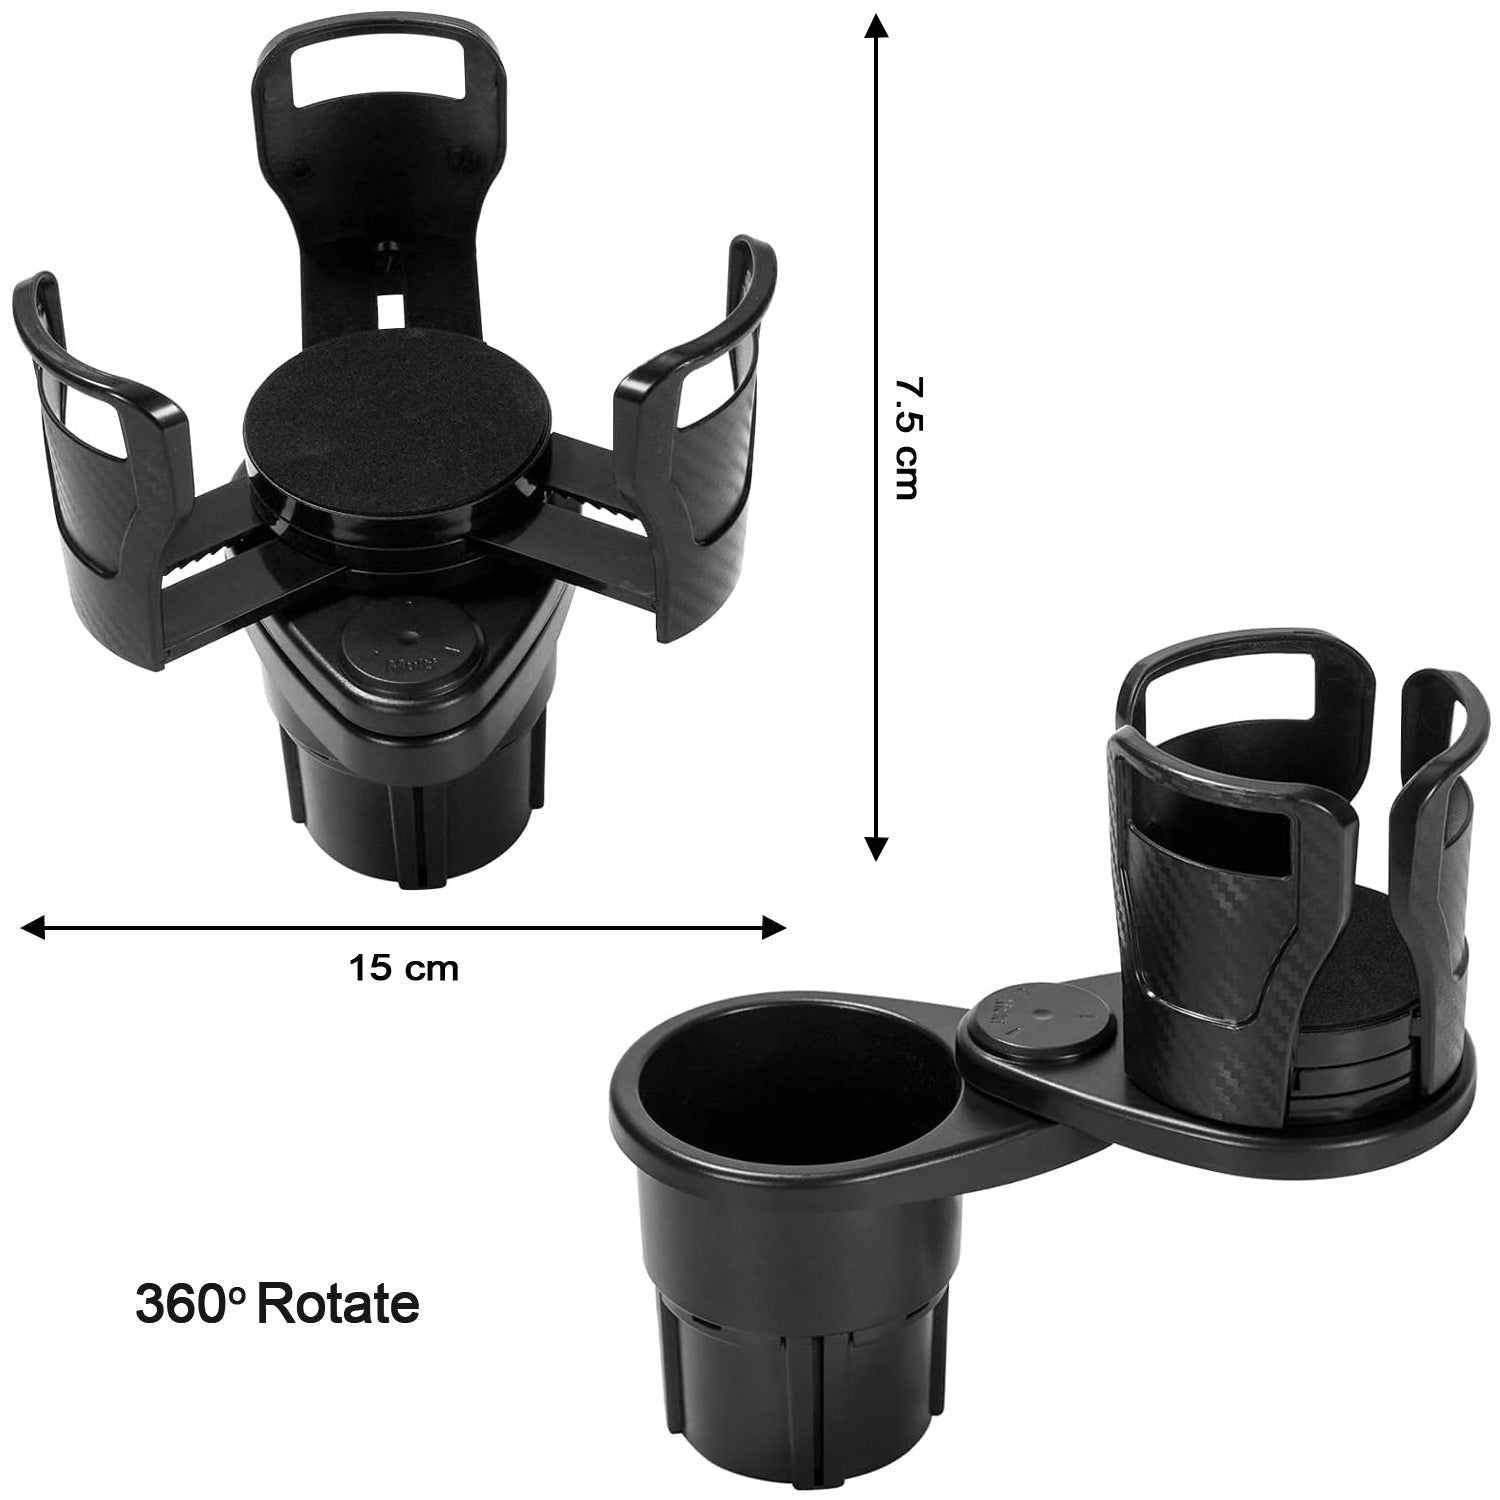 7623 Cup Holder, Seat Cup Holder Suitable for 20oz Water Bottles 2 in 1 Cup Holder Universal Vehicle Seat Bottle Mount with Set of Sponge Cushion for Vehicle JK Trends